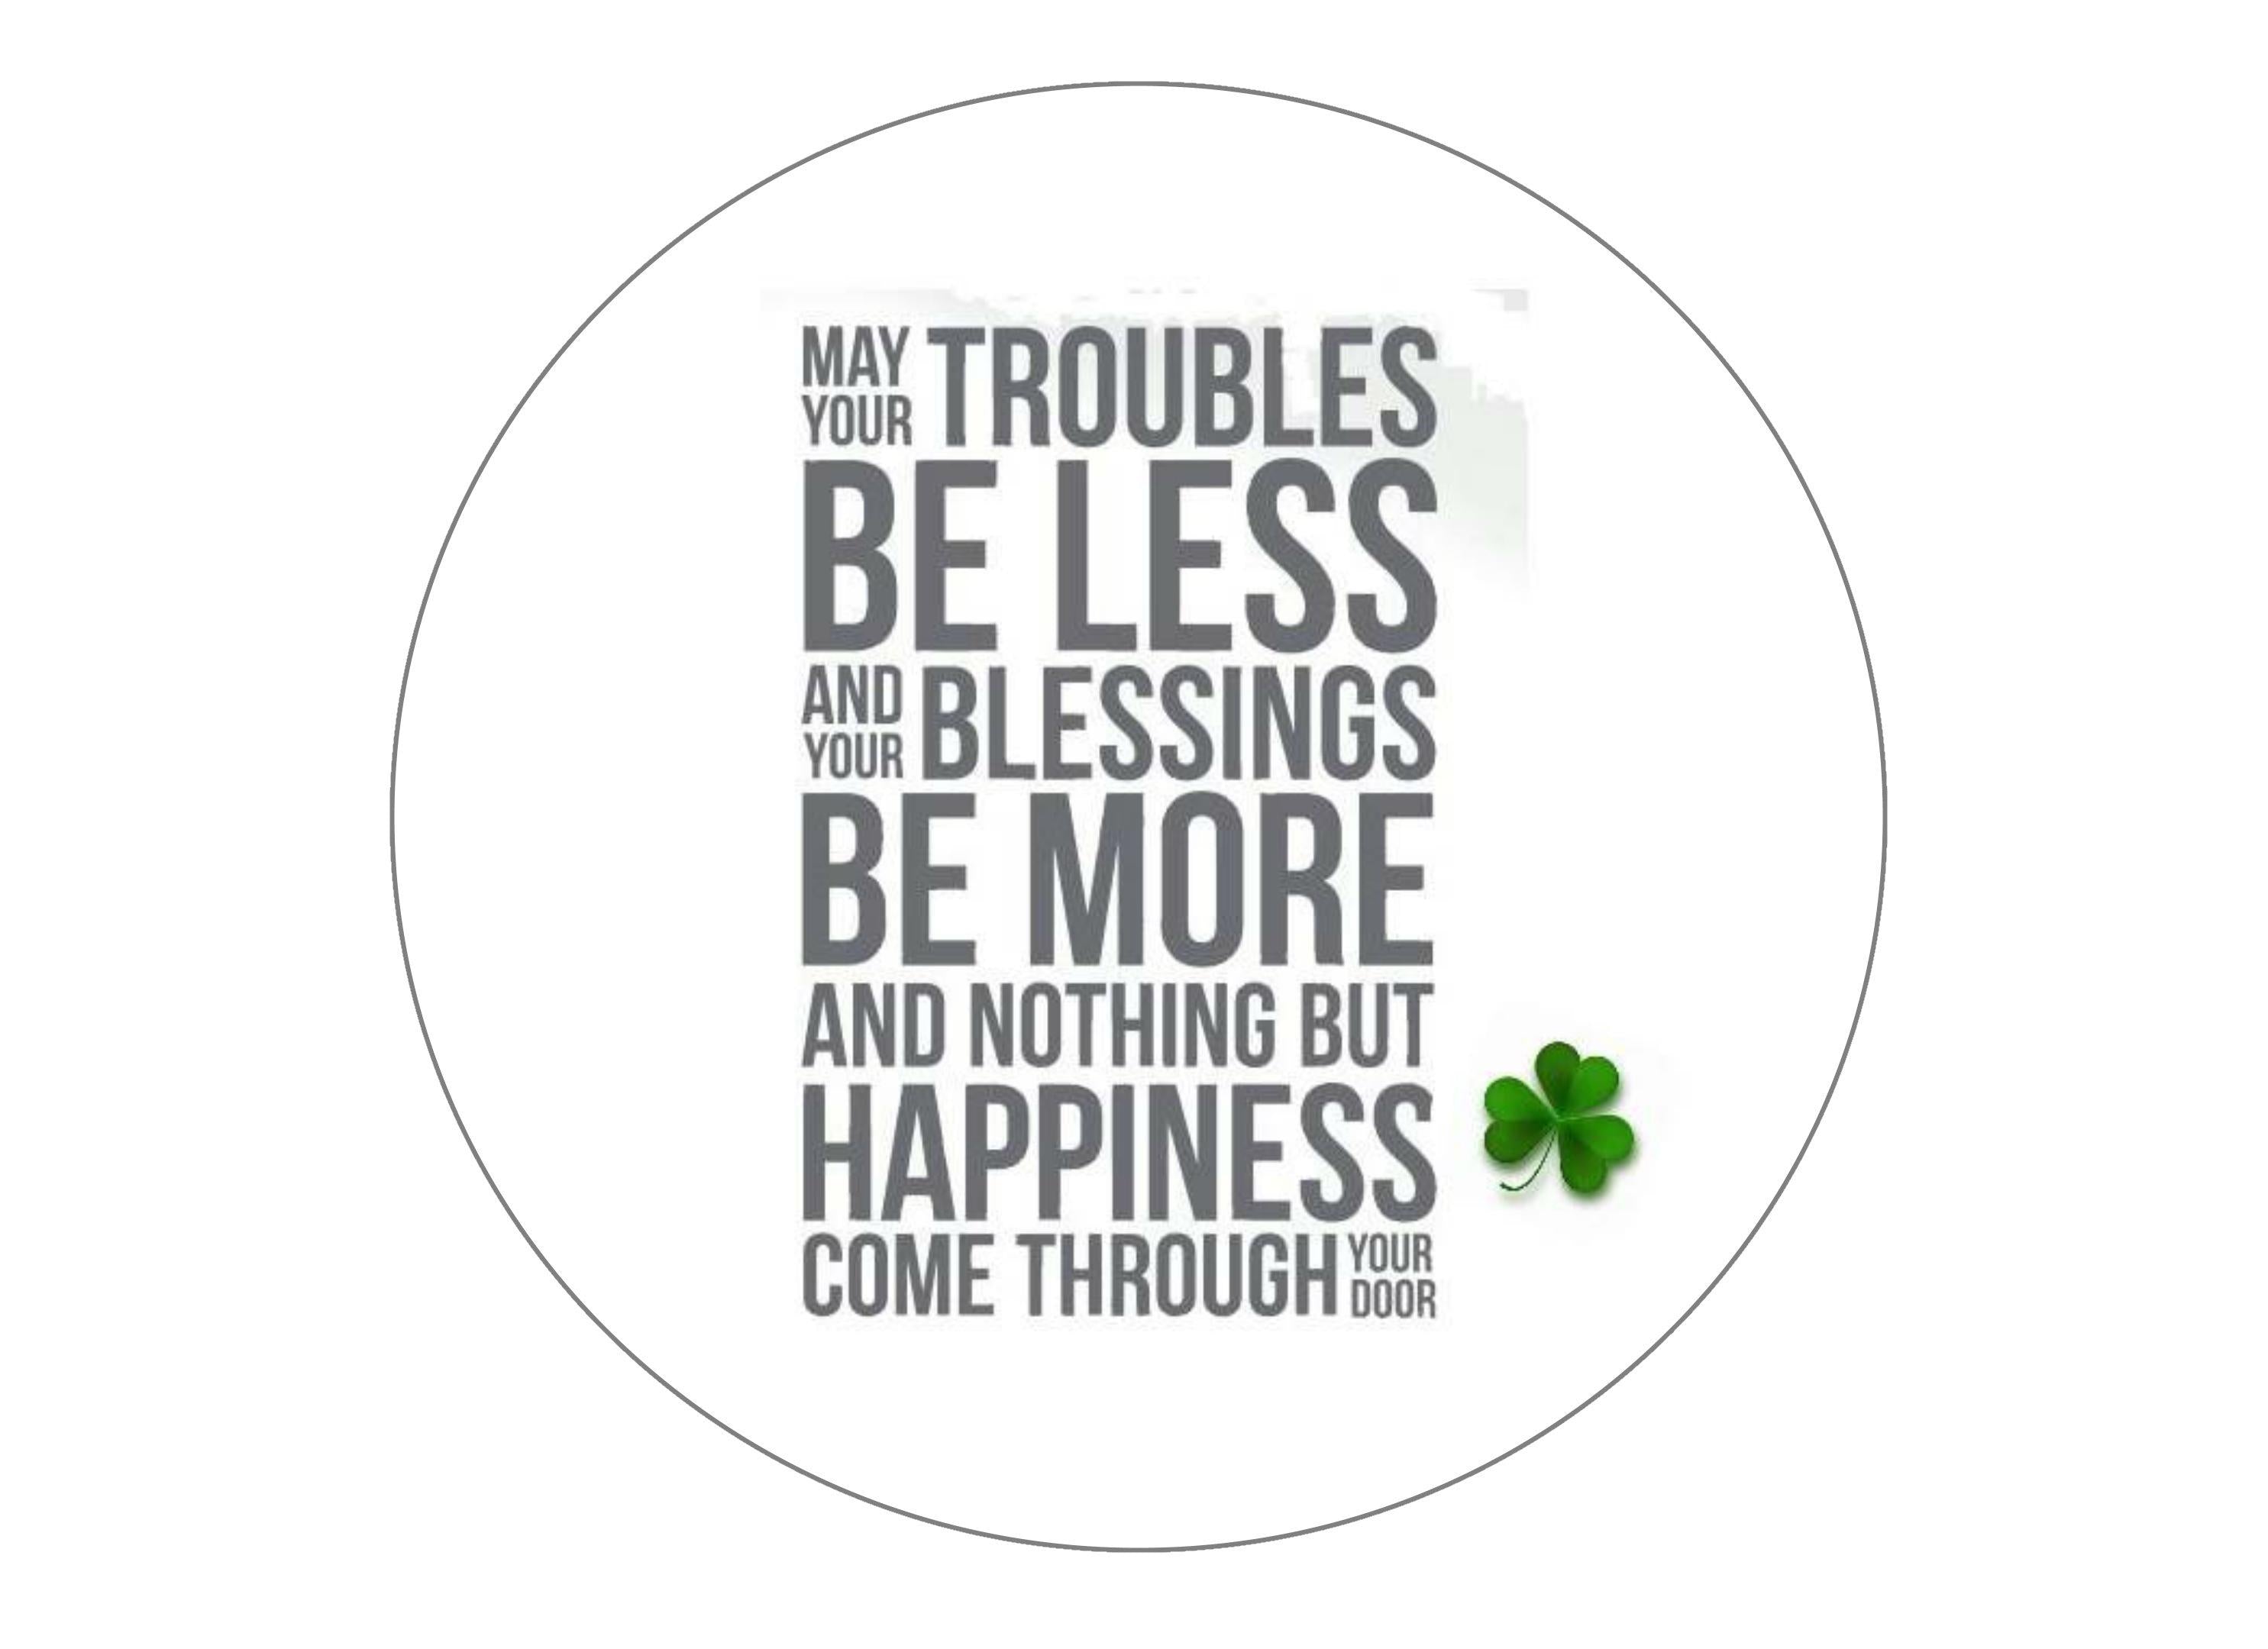 190mm printed edible cake topper with a Blessing by St Patrick